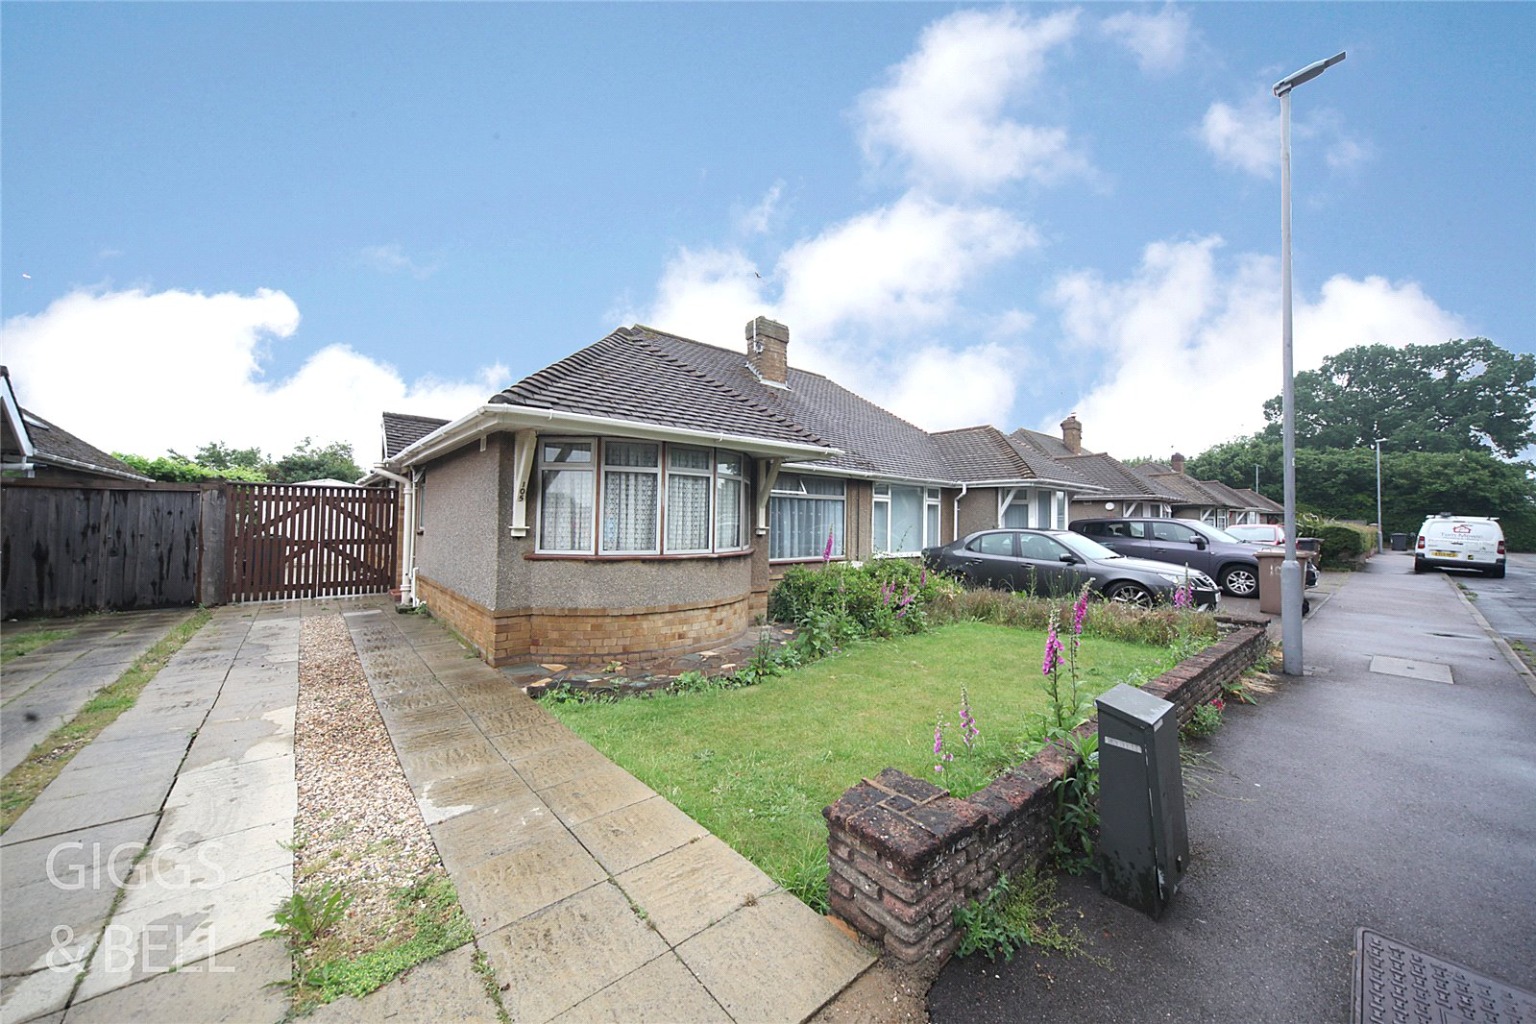 2 bed semi-detached bungalow for sale in Stopsley Way, Luton, LU2 